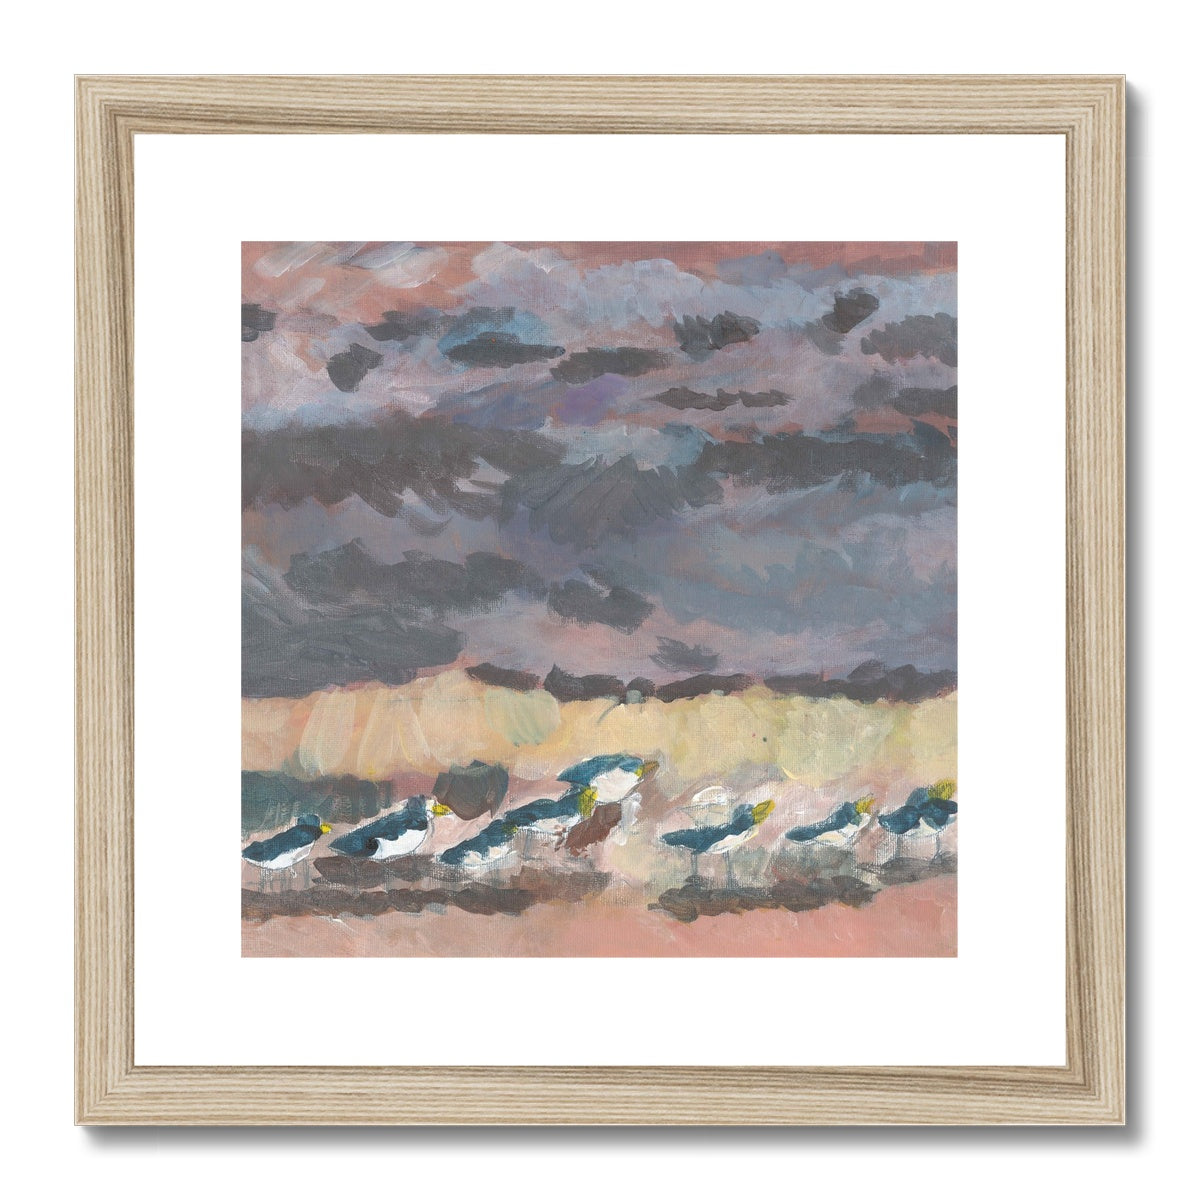 Birds on Oare Marches, Framed & Mounted Print